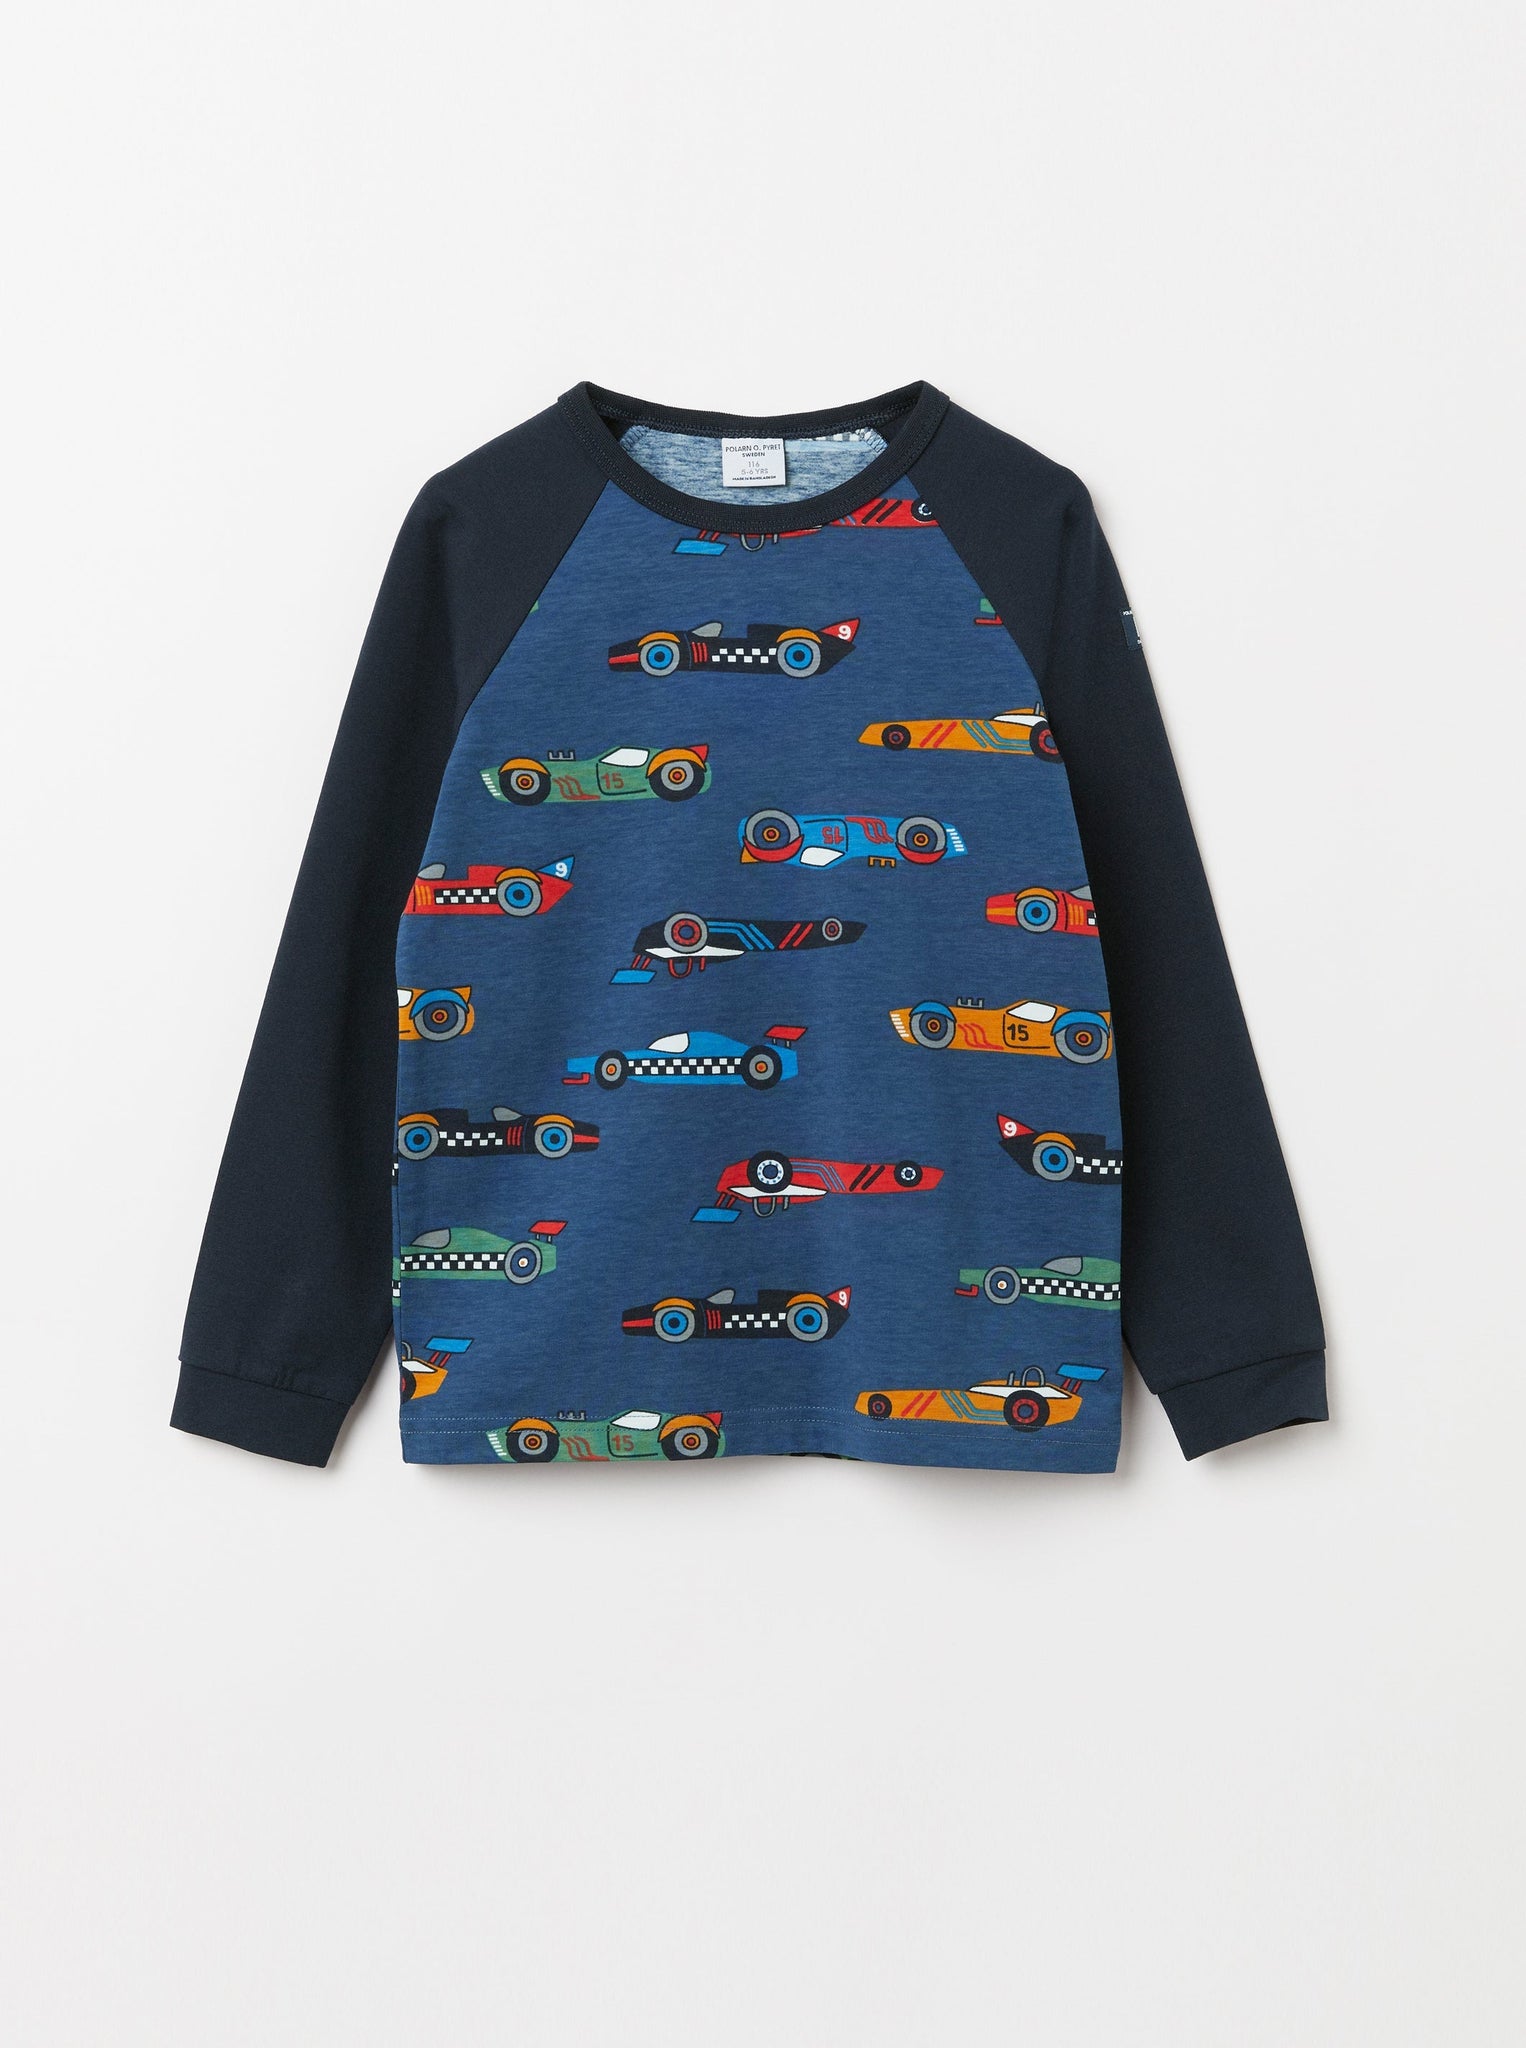 Organic Cotton Car Print Kids Top from the Polarn O. Pyret Kidswear collection. Clothes made using sustainably sourced materials.